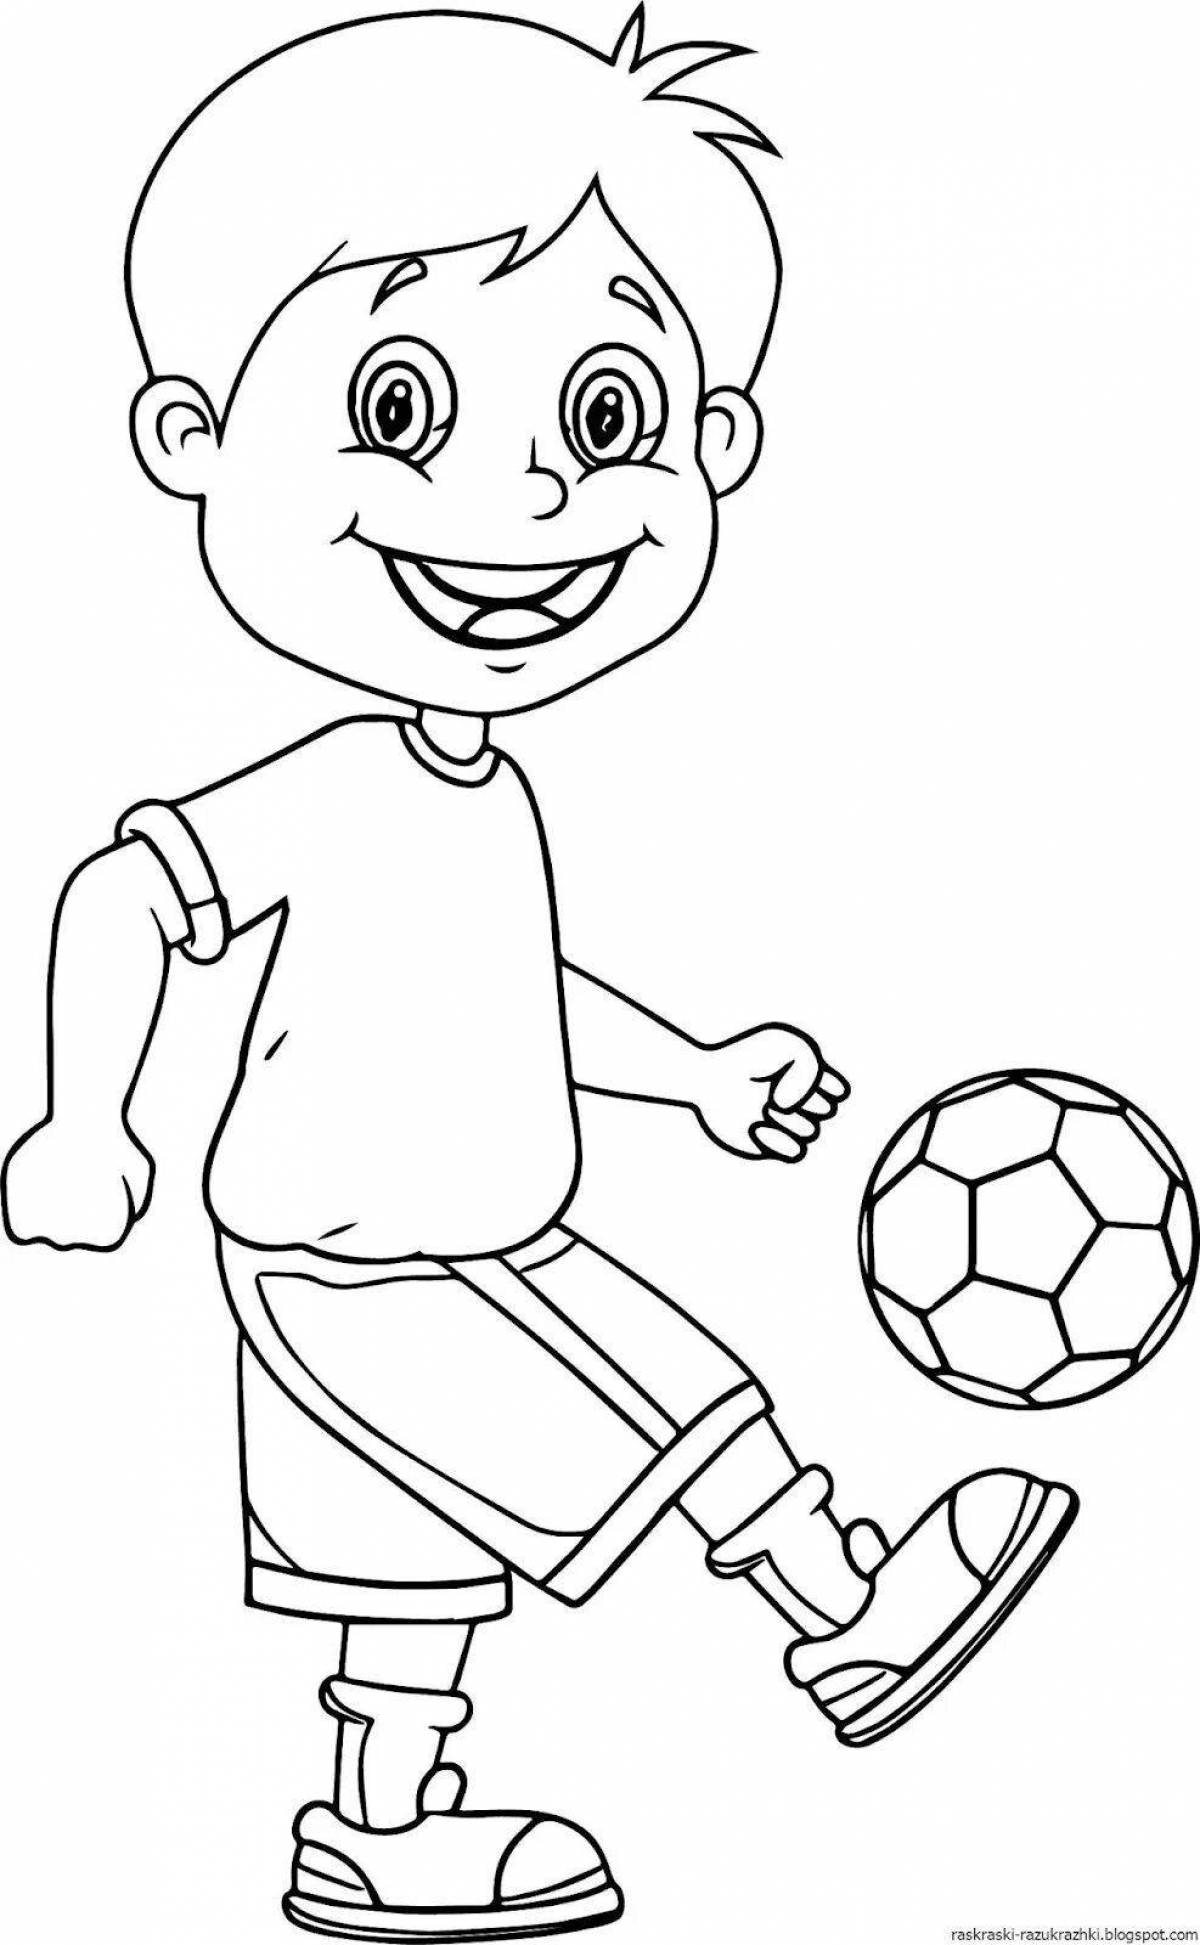 Funny sportsmen coloring pages for kids